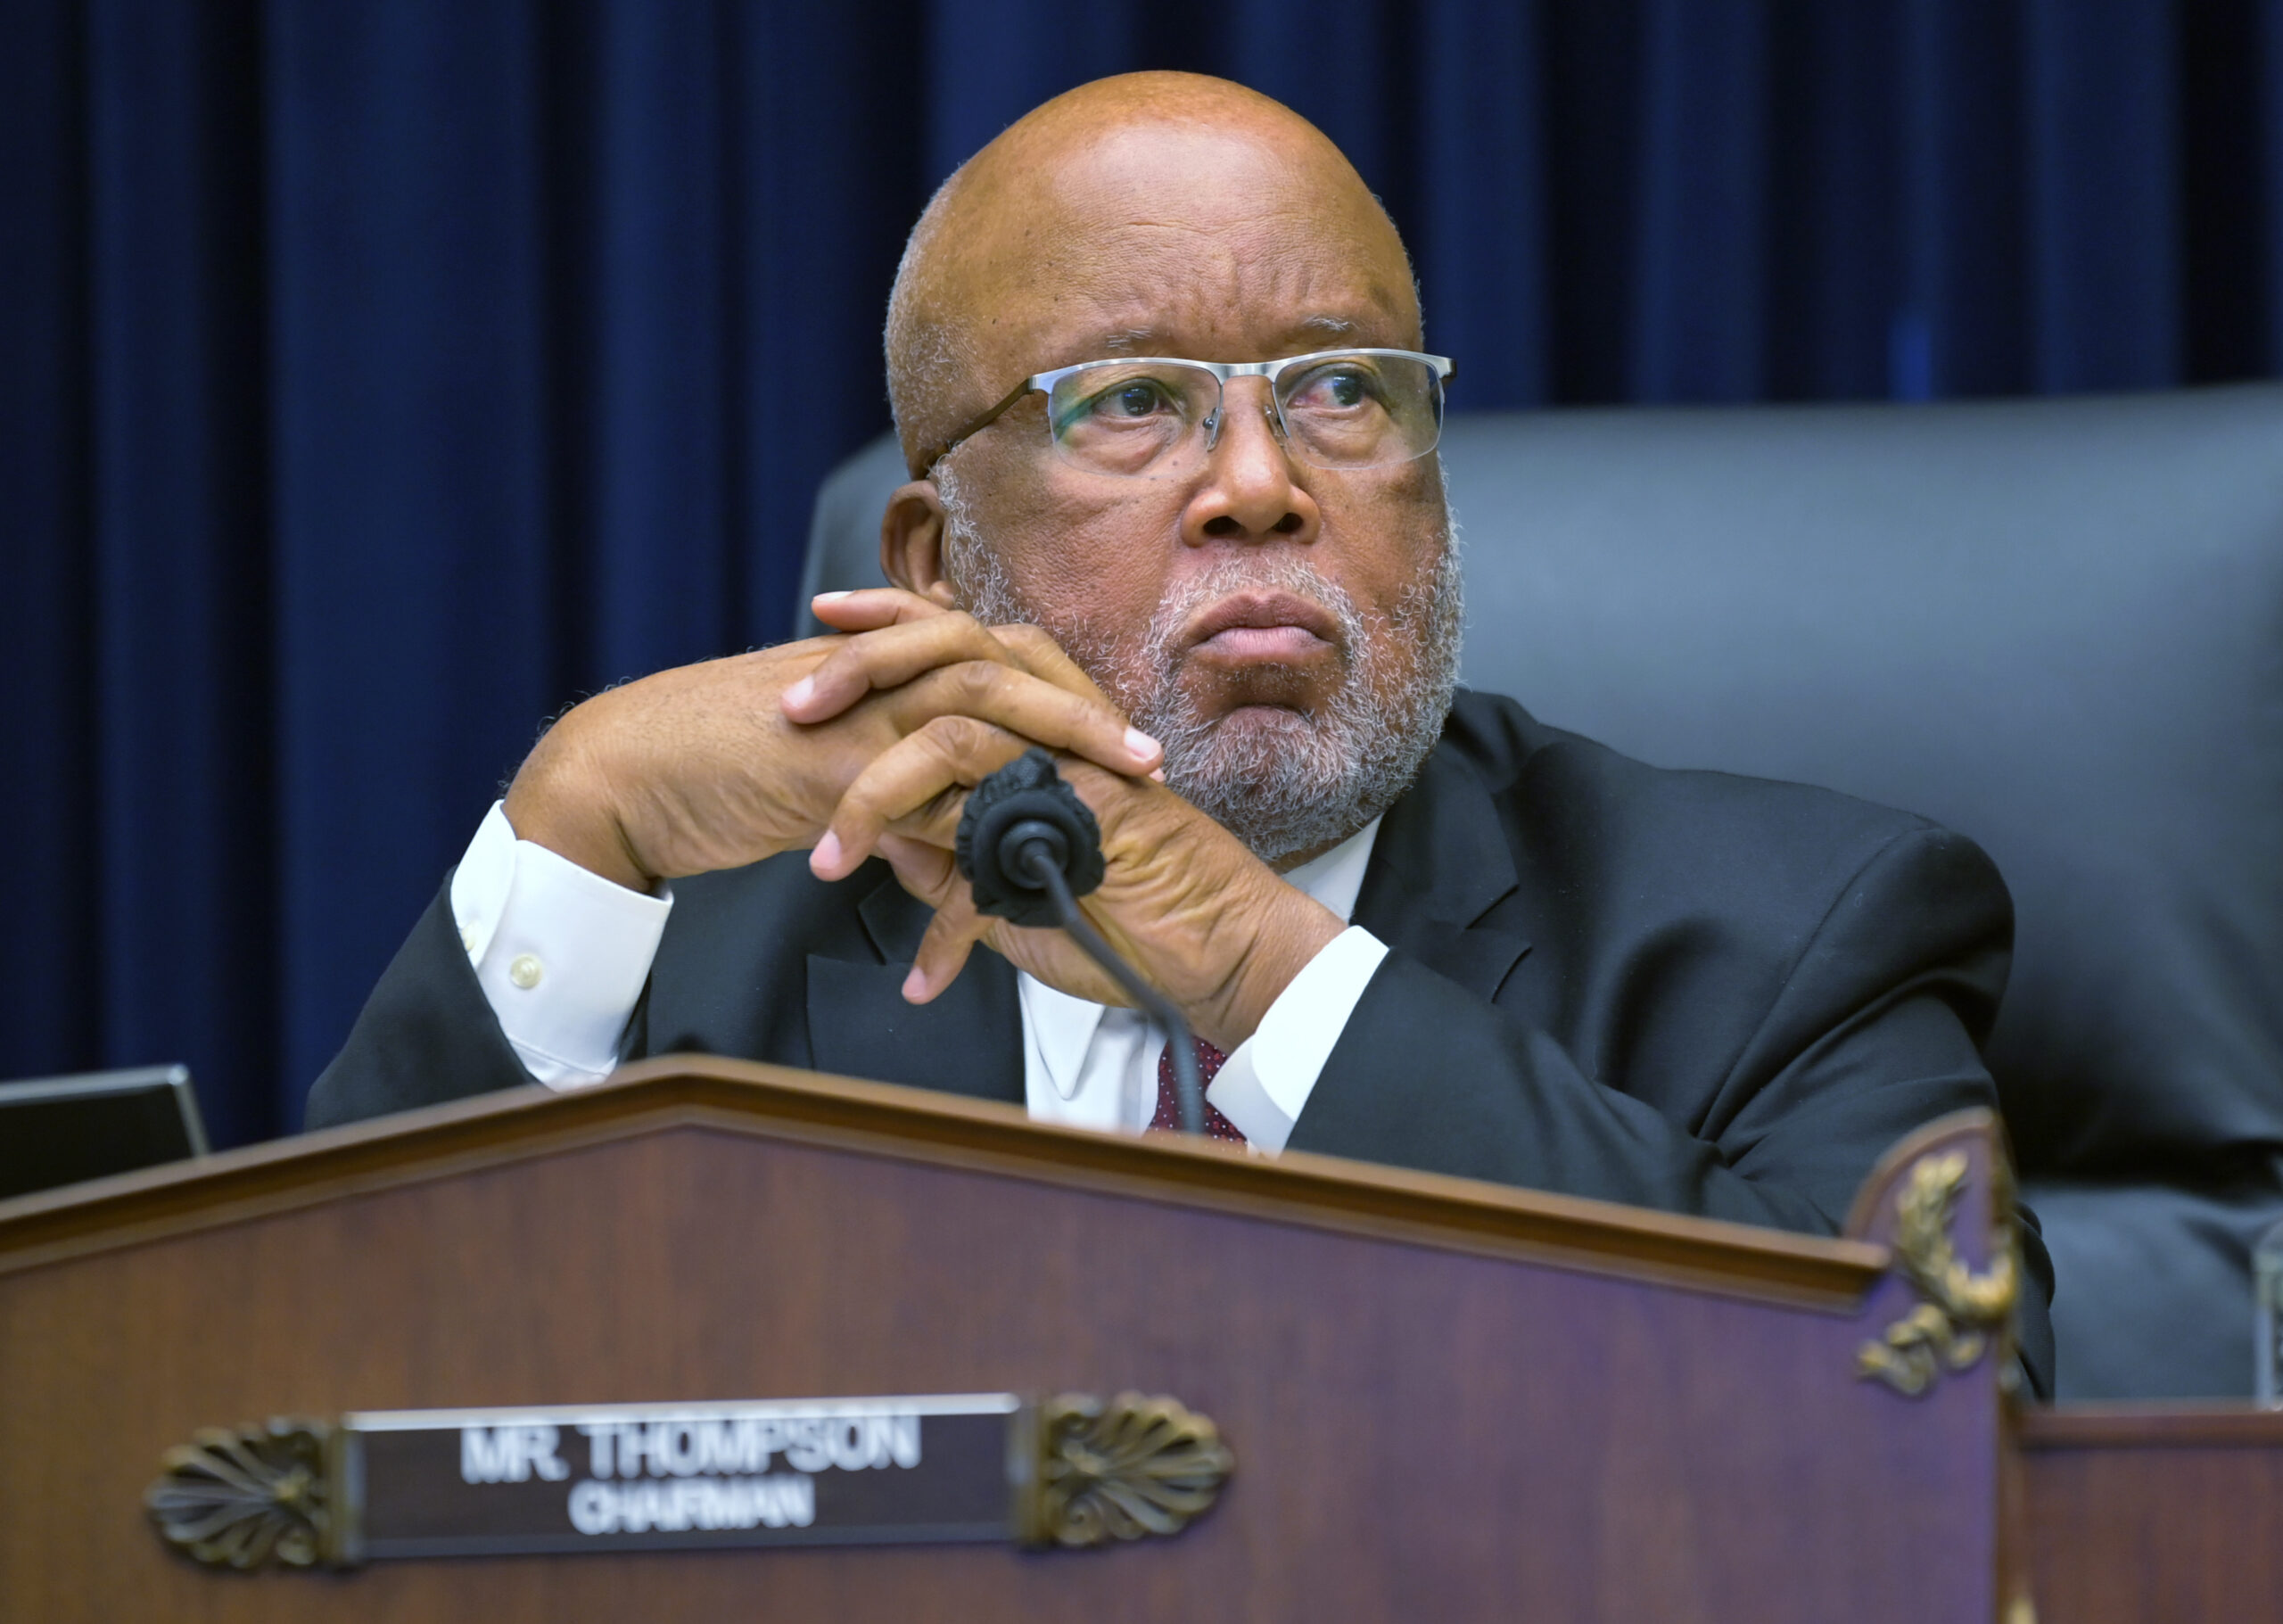 FILE - In this Sept. 17, 2020 file photo, Committee Chairman Rep. Bennie Thompson, D-Miss., speaks during a House Committee on Homeland Security hearing on 'worldwide threats to the homeland', on Capitol Hill Washington. Thompson has sued former President Donald Trump, alleging Trump incited the deadly insurrection at the U.S. Capitol. The lawsuit in Washington's federal court alleges the Republican former president conspired with members of far-right extremist groups to prevent the Senate from certifying the results of the presidential election he lost to Joe Biden. The suit also names as defendants Trump's personal lawyer Rudy Giuliani and groups including the Proud Boys and the Oath Keepers, both of which had members alleged to have taken part in the siege.(John McDonnell/The Washington Post via AP, Pool)